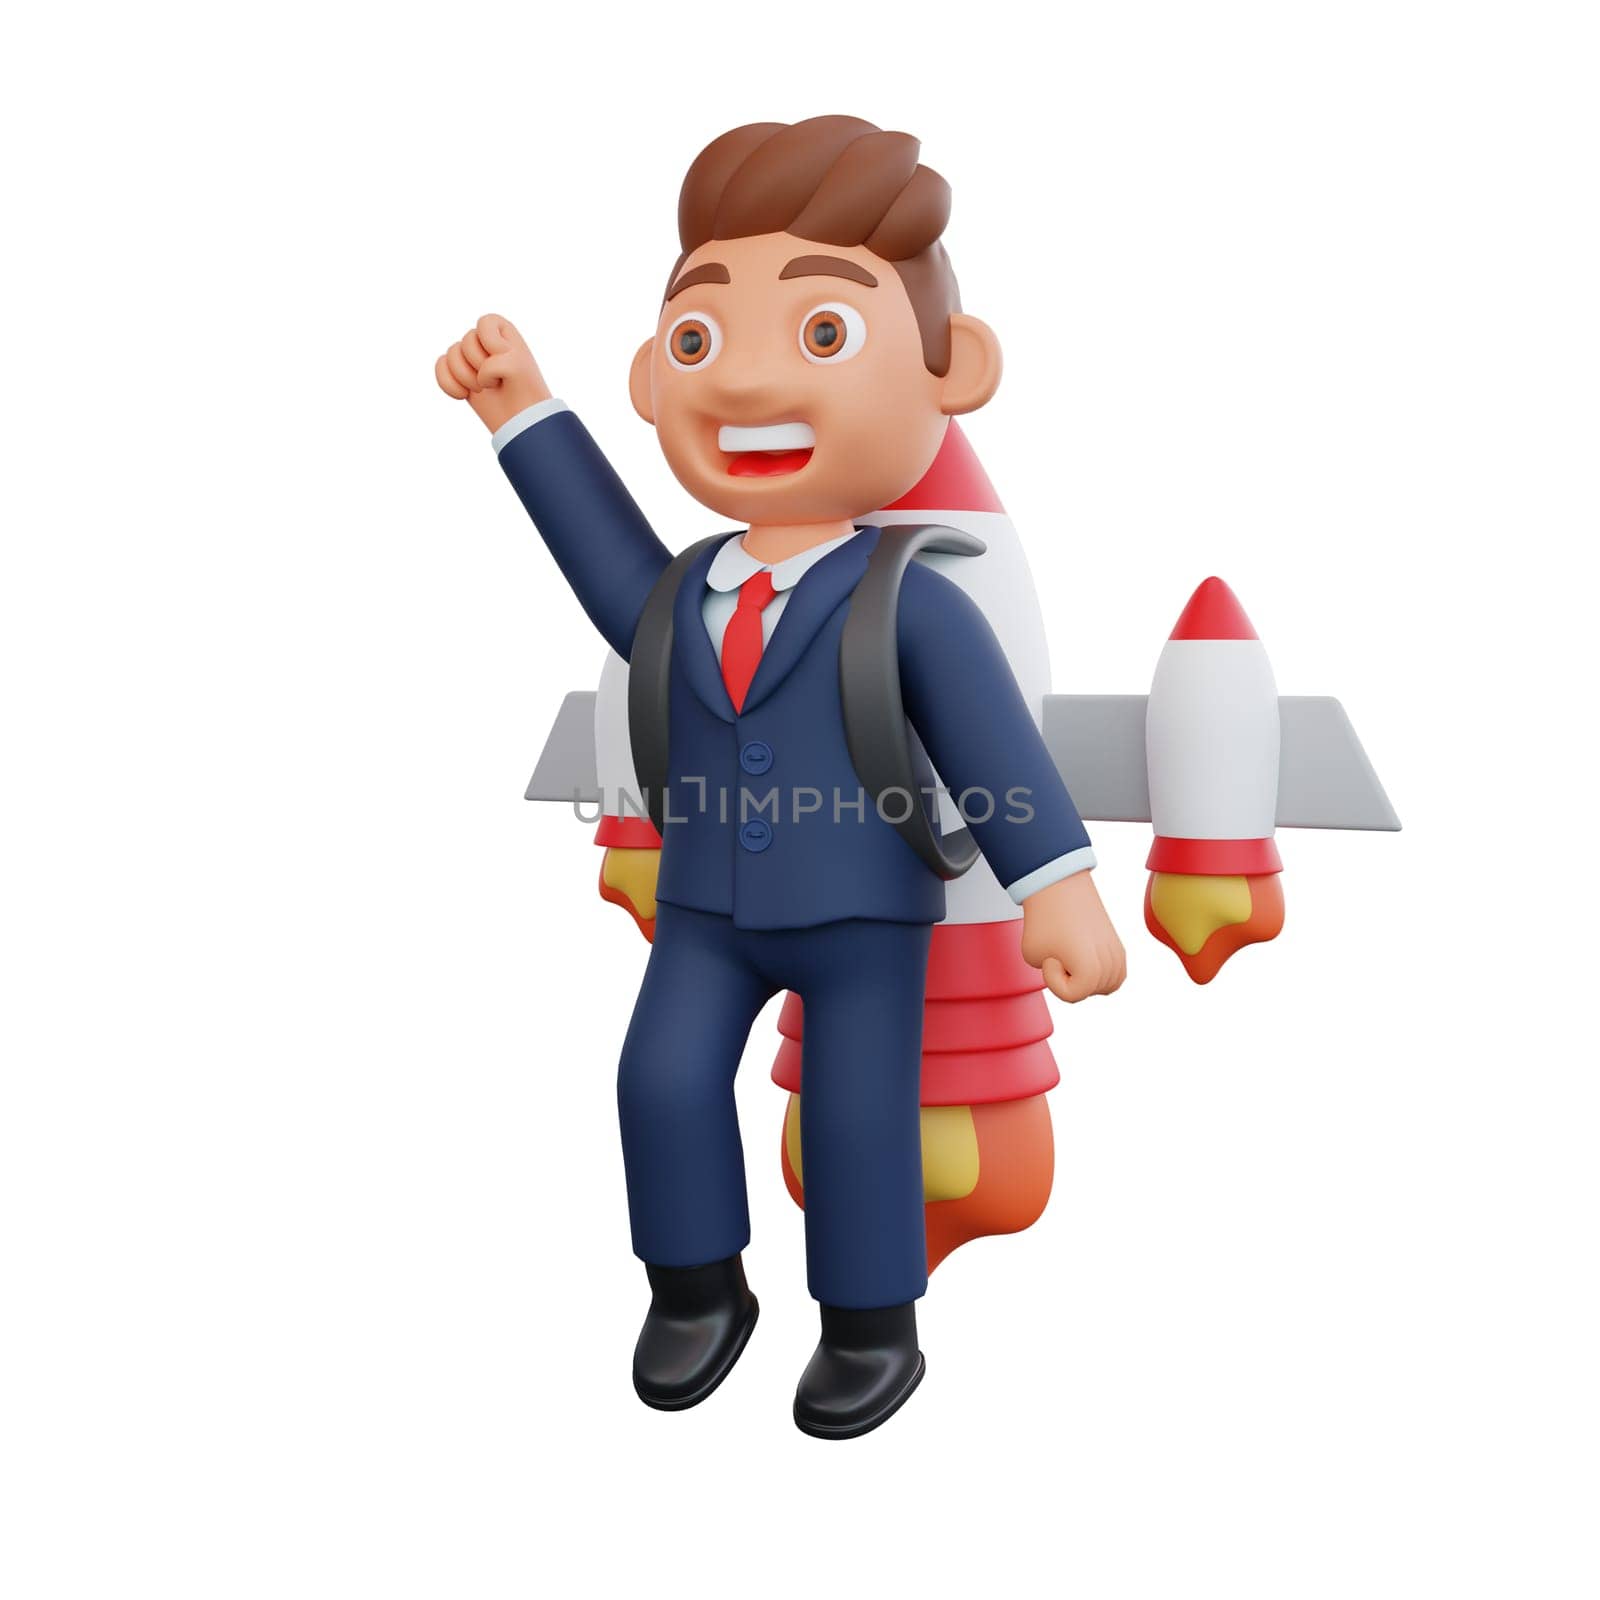 3d Illustration businessman character manager in different poses and business activities